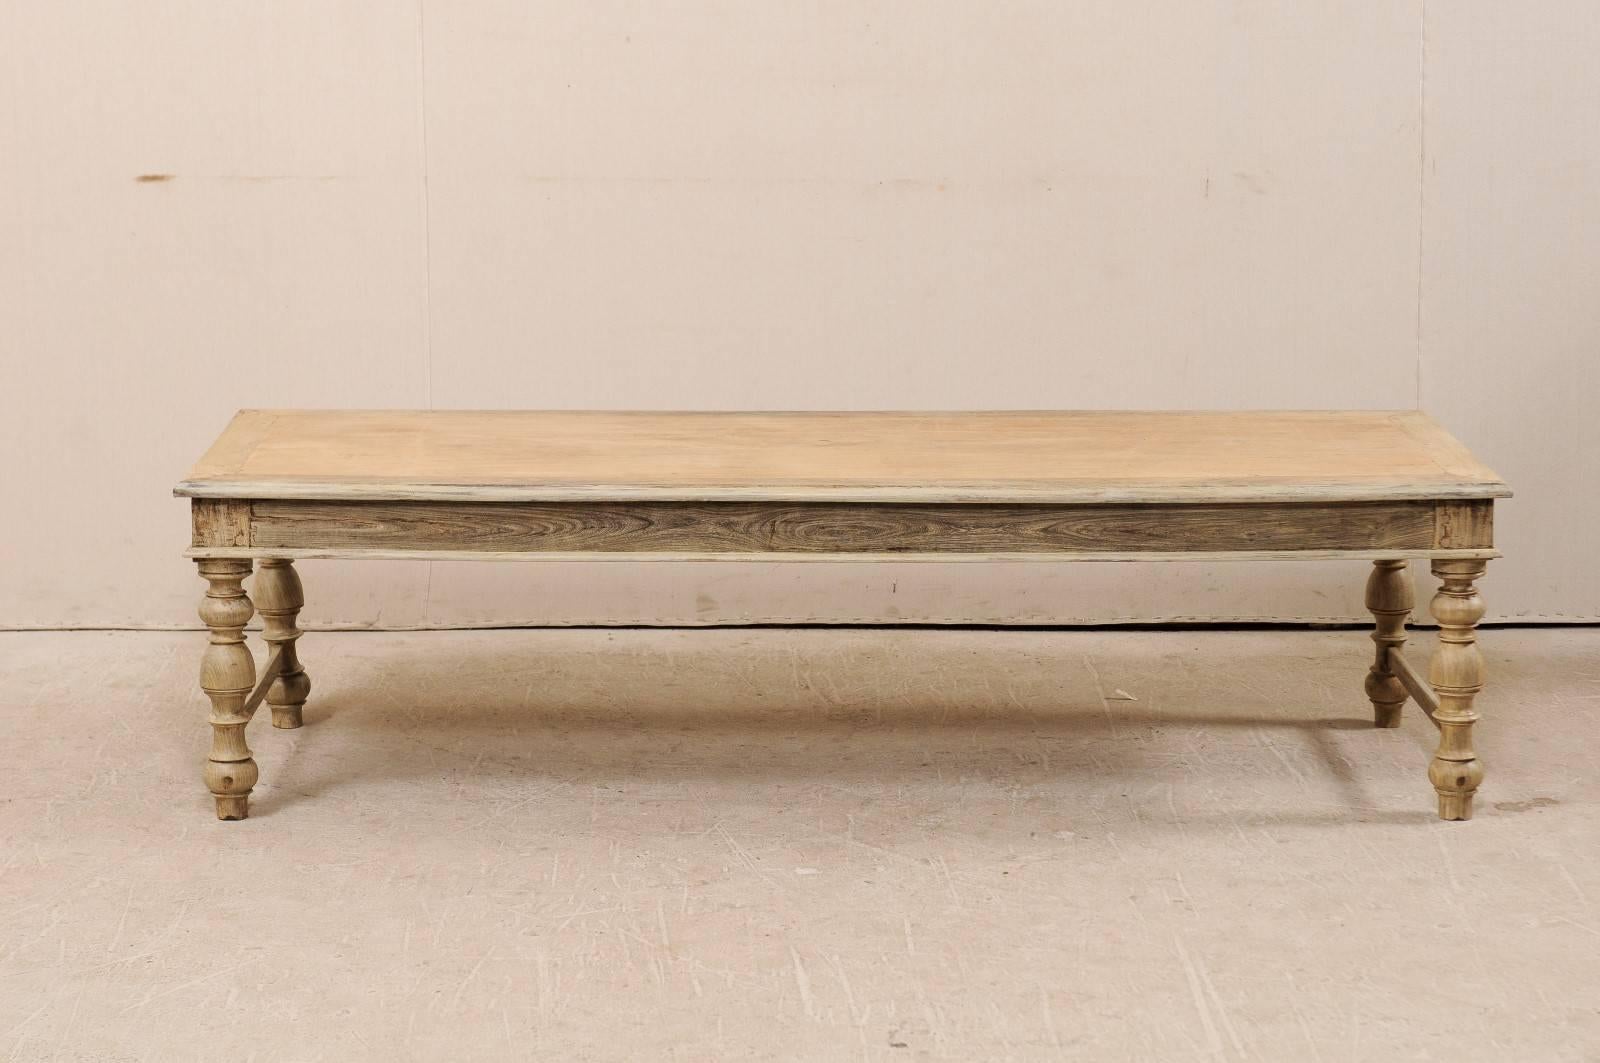 Belgian Mid-20th Century Pale Wood Coffee or Centre Table with Turned Legs For Sale 2